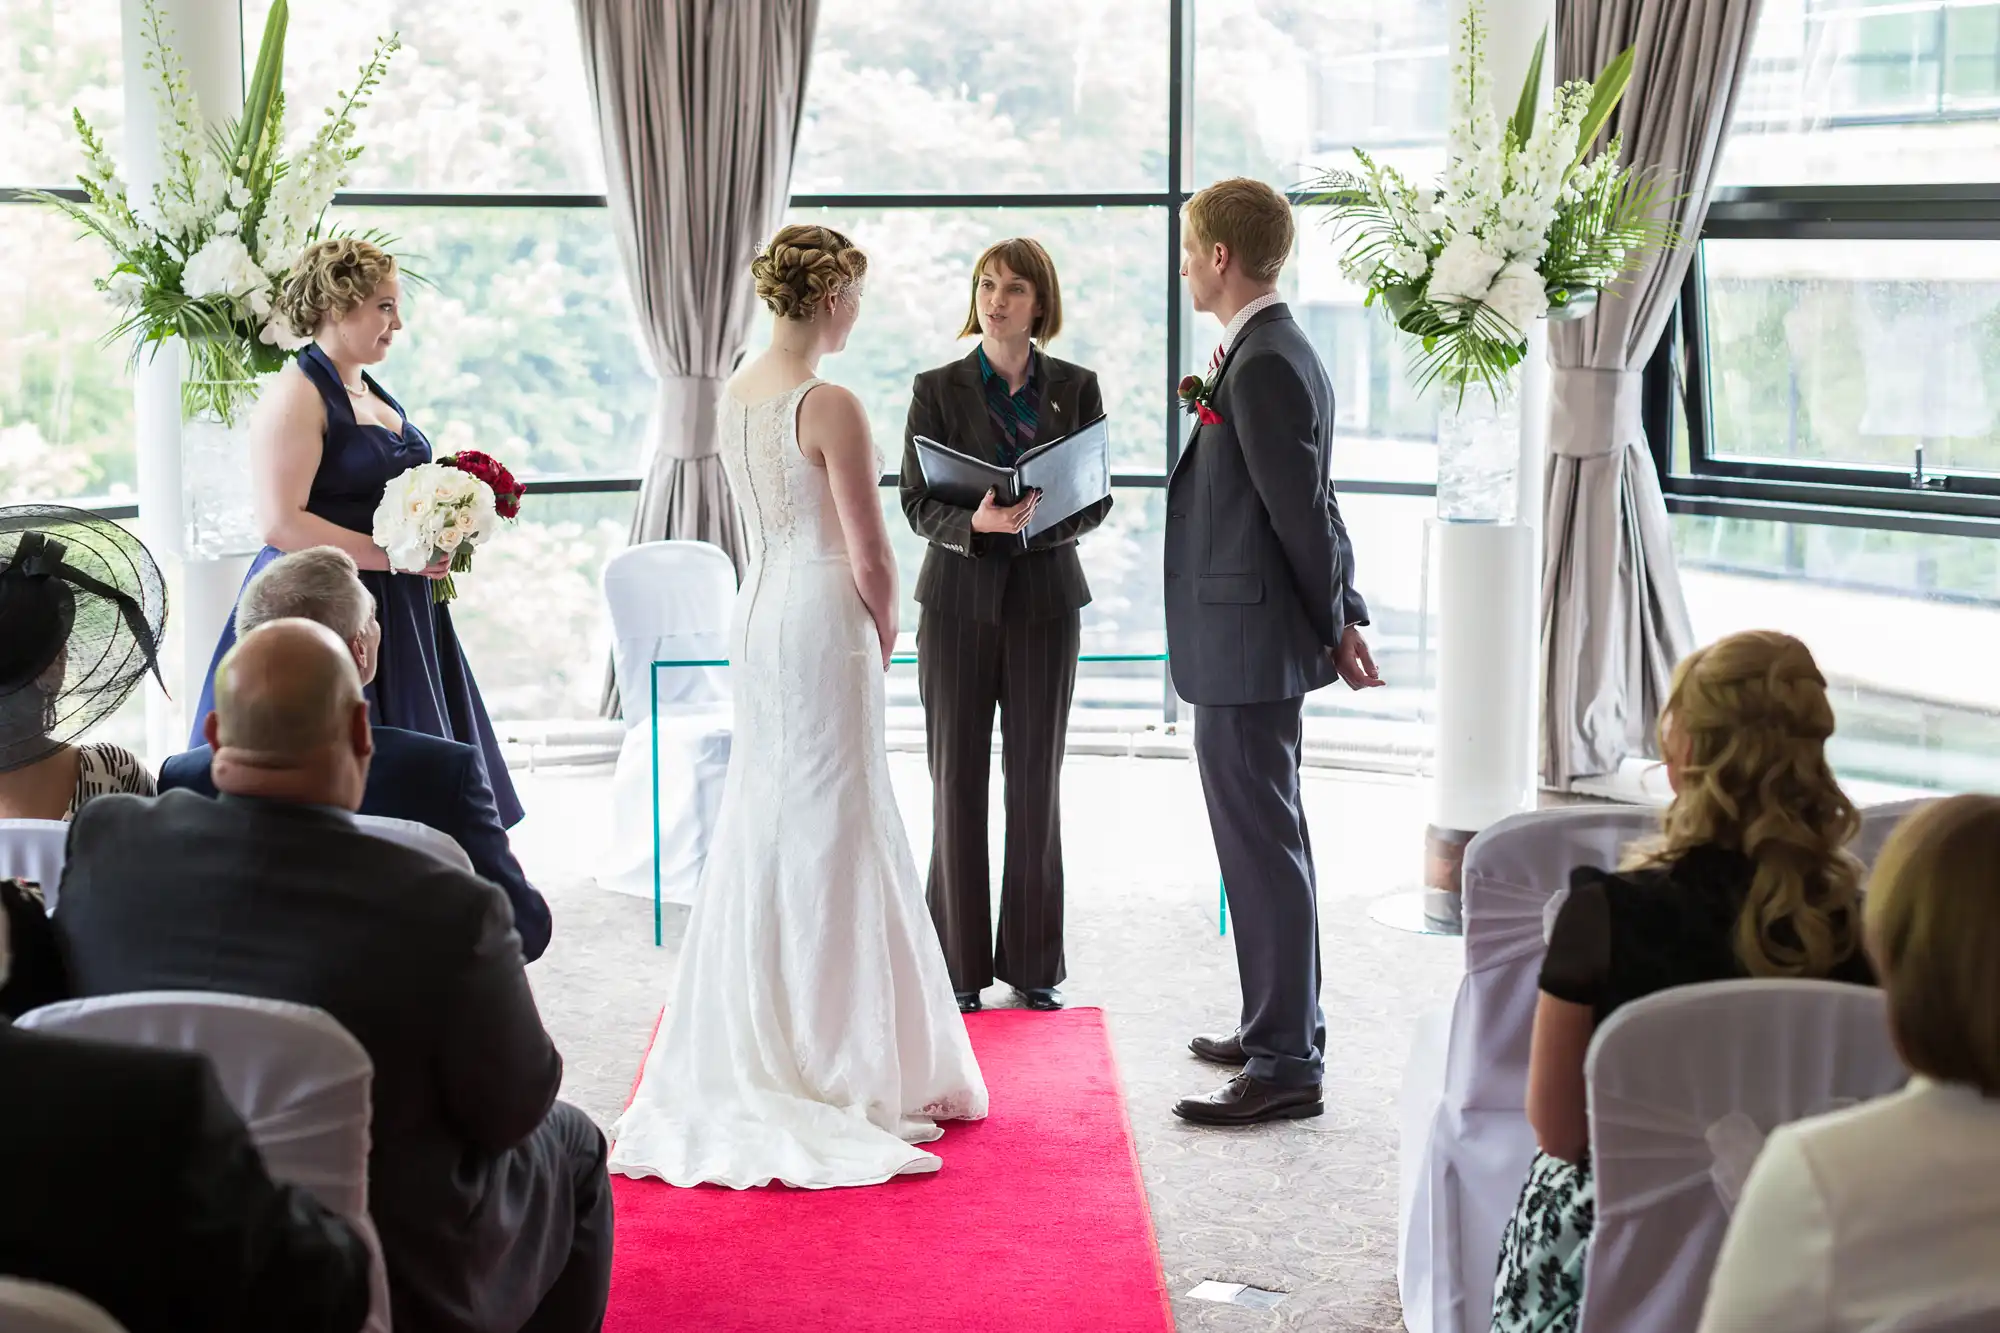 A wedding ceremony indoors with the couple standing at the altar facing the officiant, guests seated around, and large windows in the background.